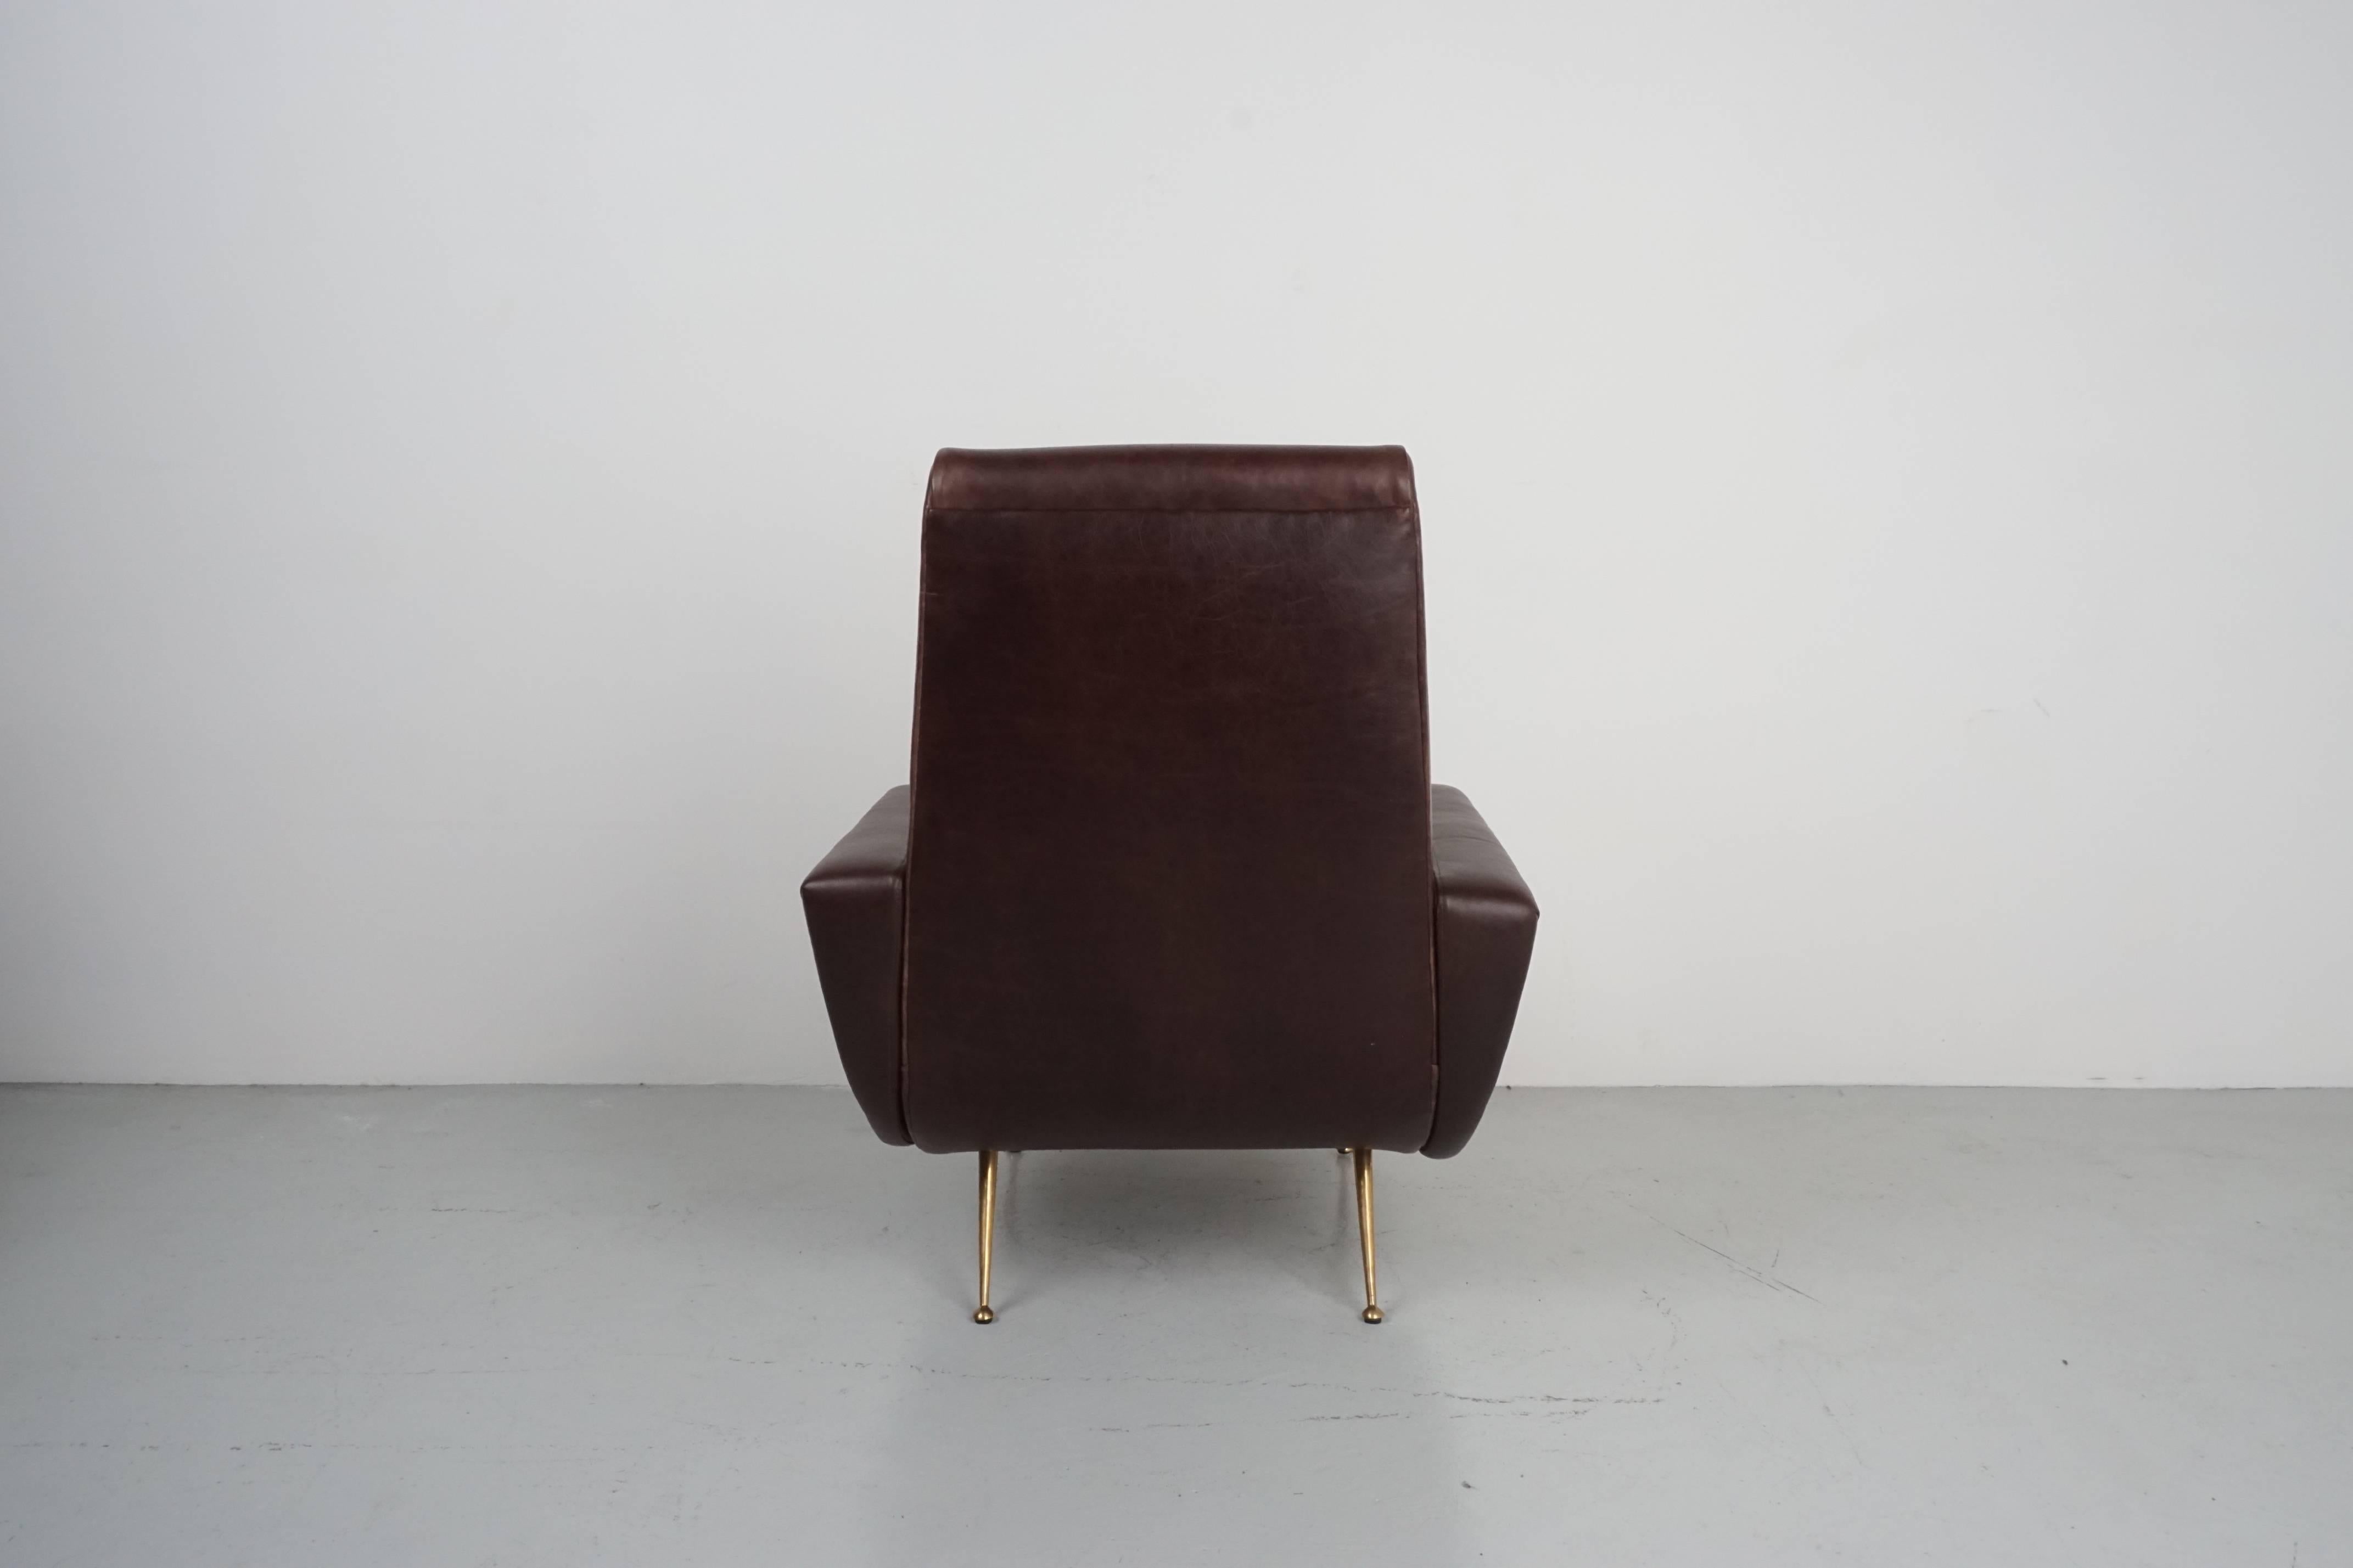 Italian Sculptural Leather Chairs 1